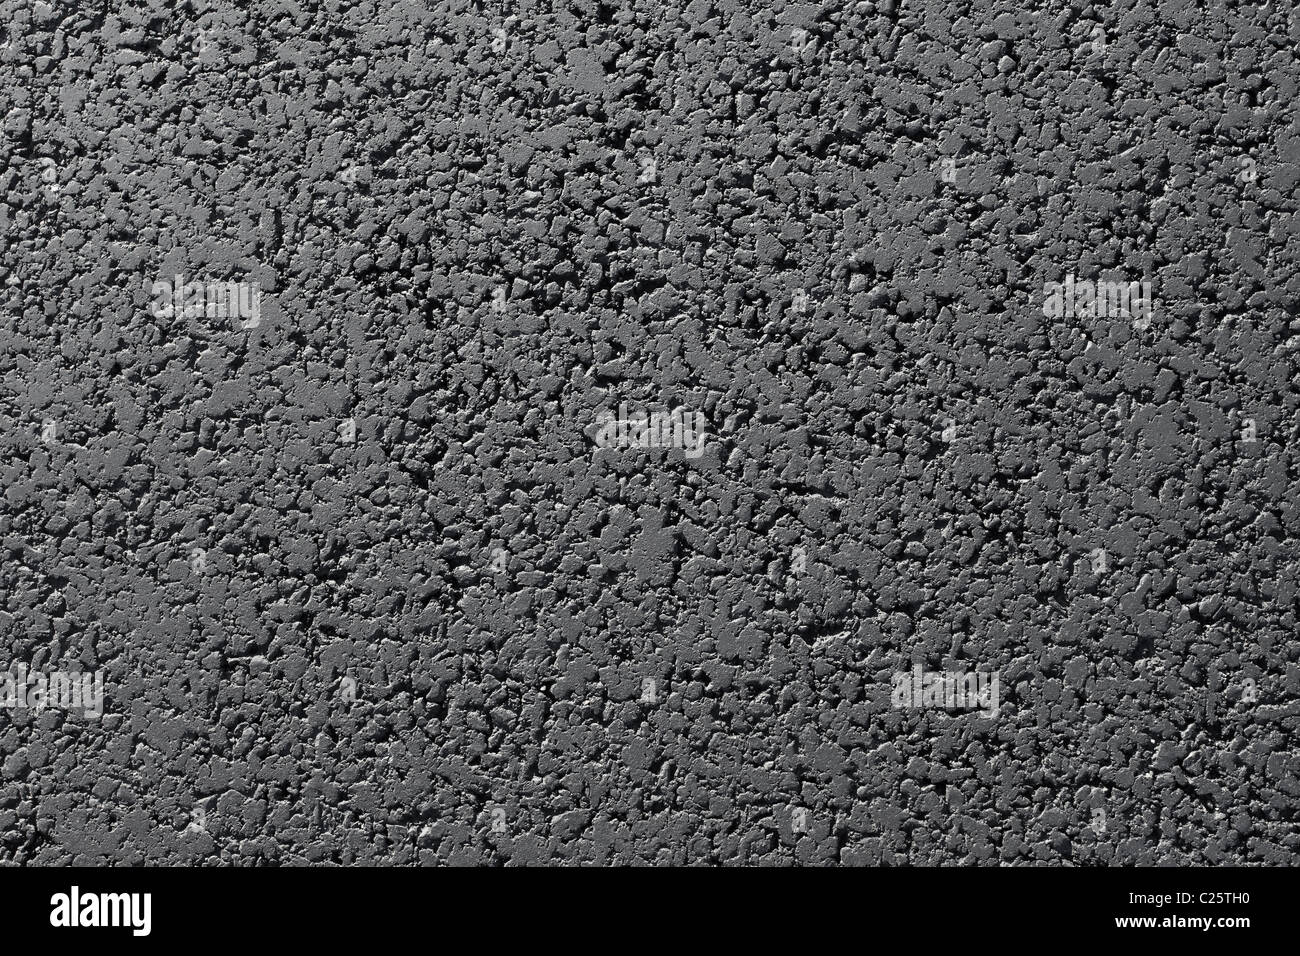 New black tarmac road surface close up abstract texture background. Stock Photo